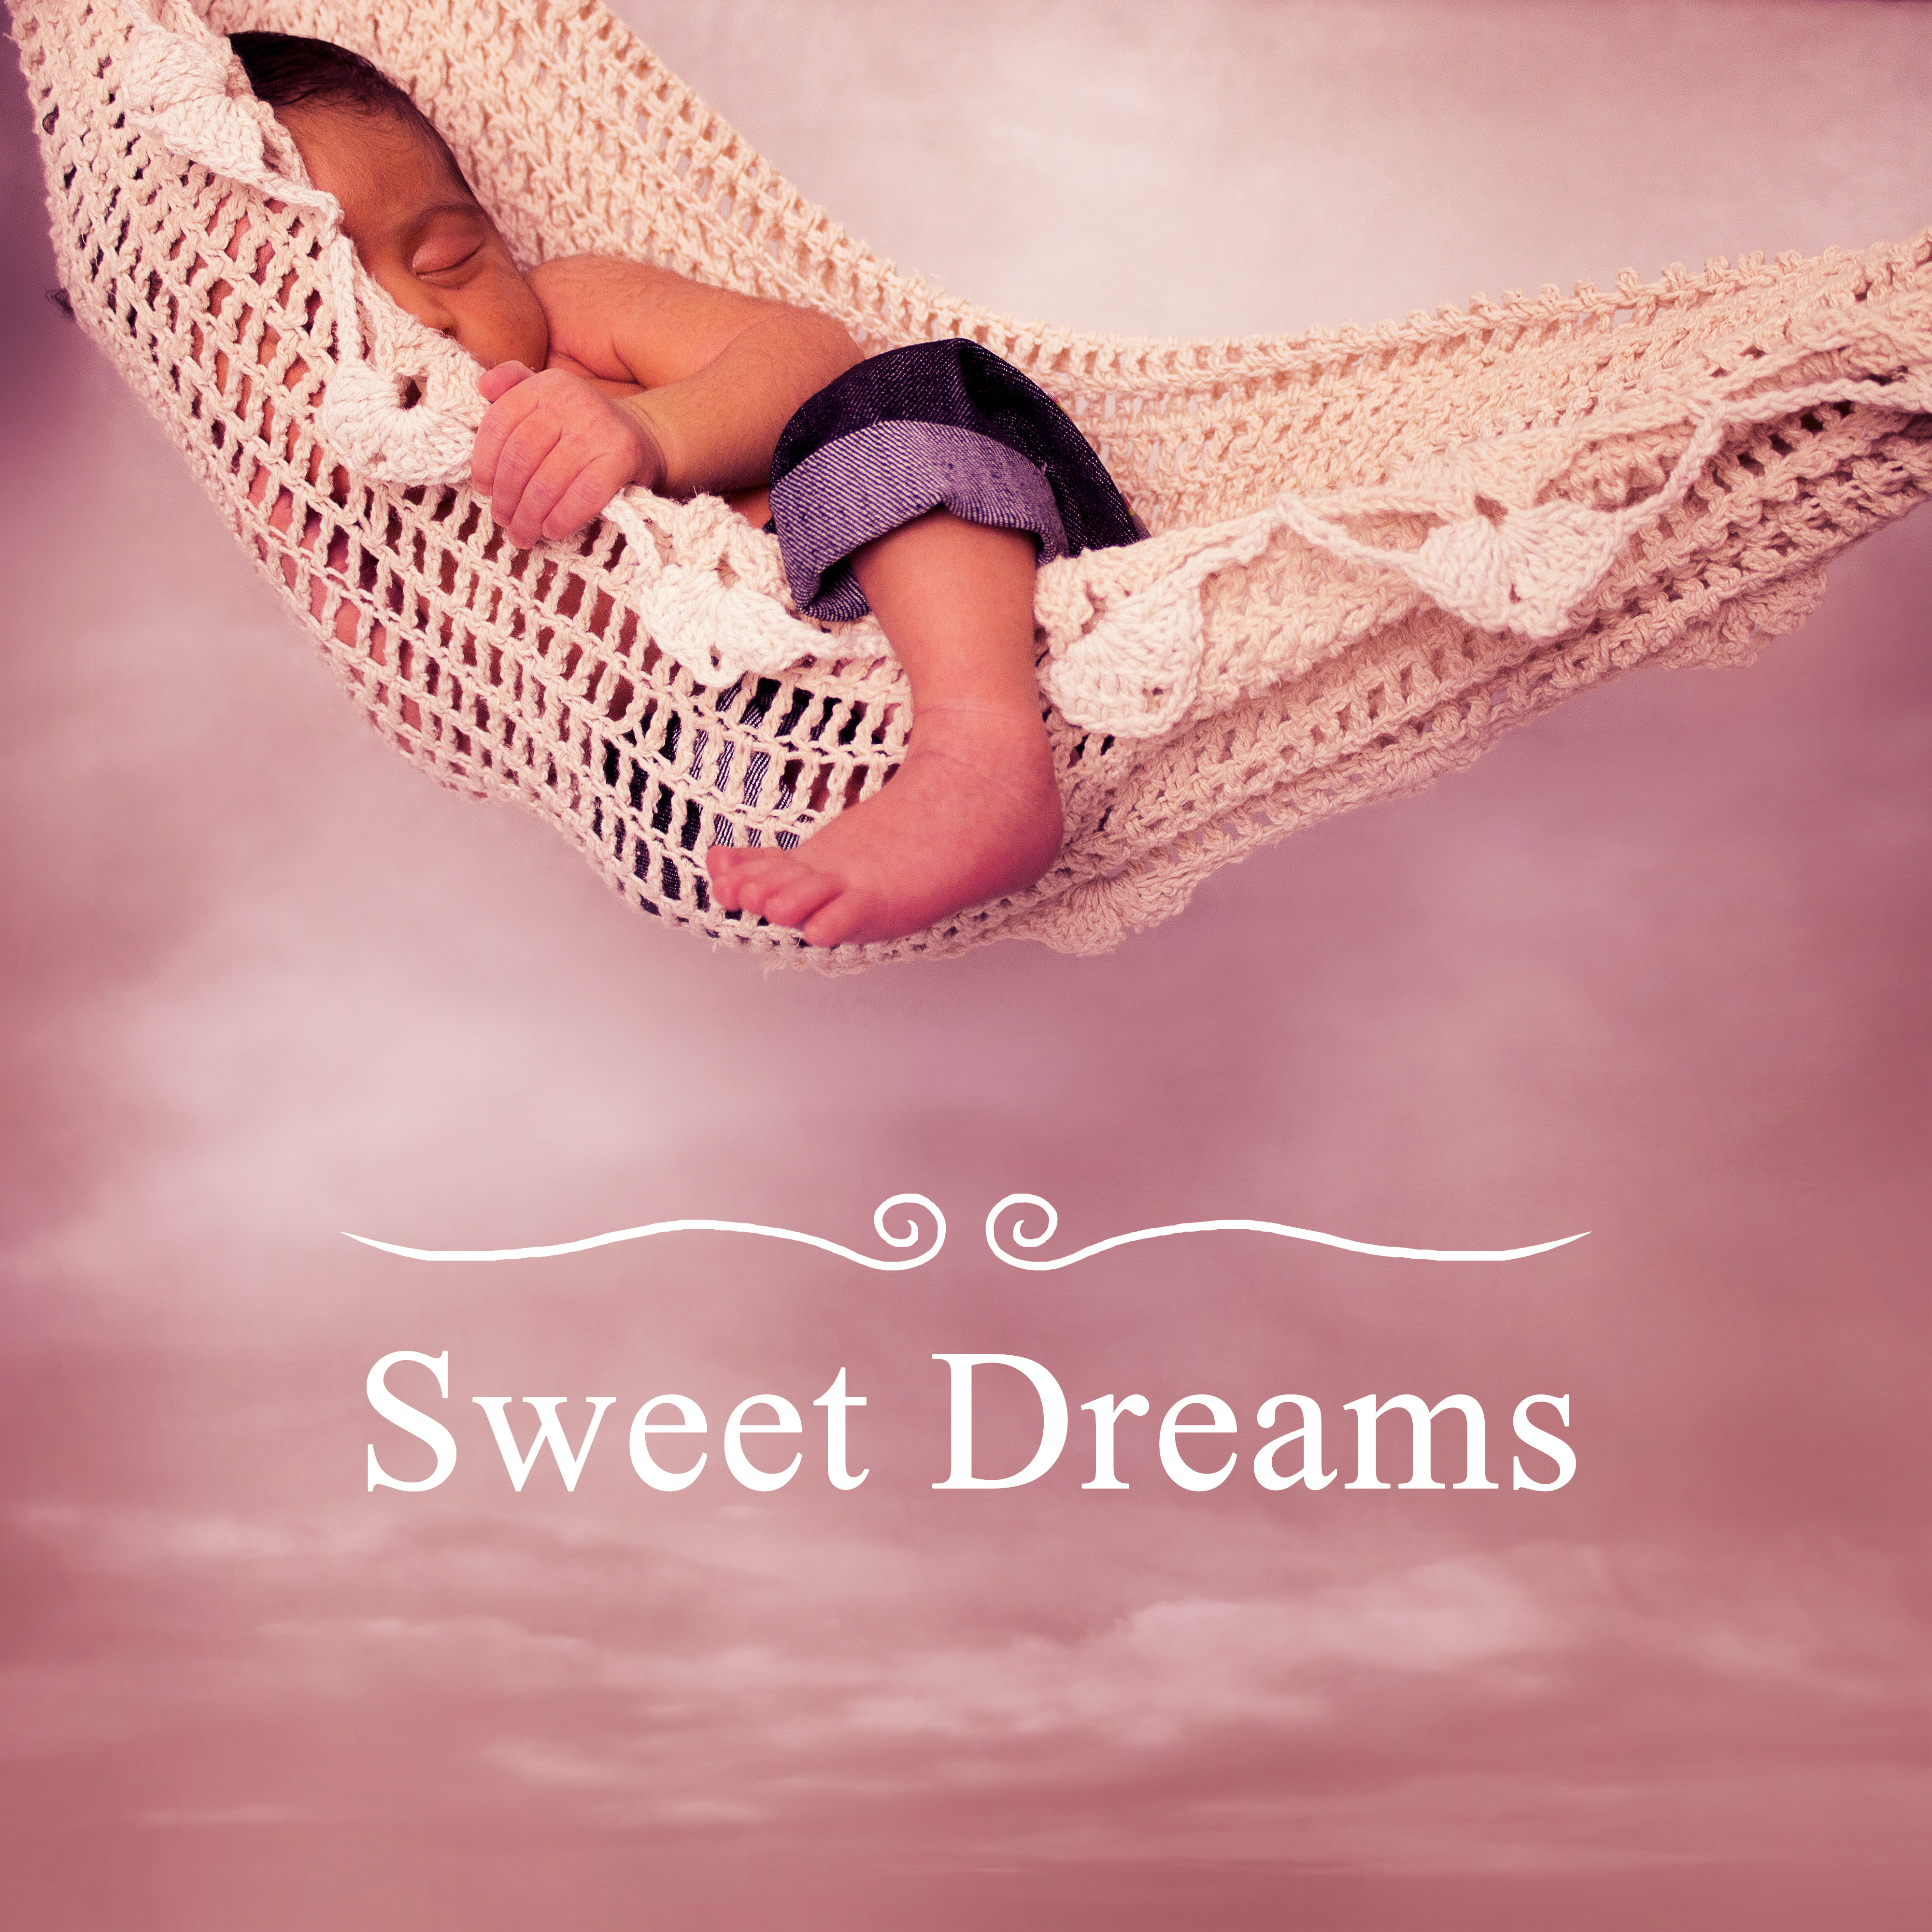 Sweet Dreams  Healing Lullaby for Baby, Restful Sleep, Relaxation, Classical Music at Goodnight